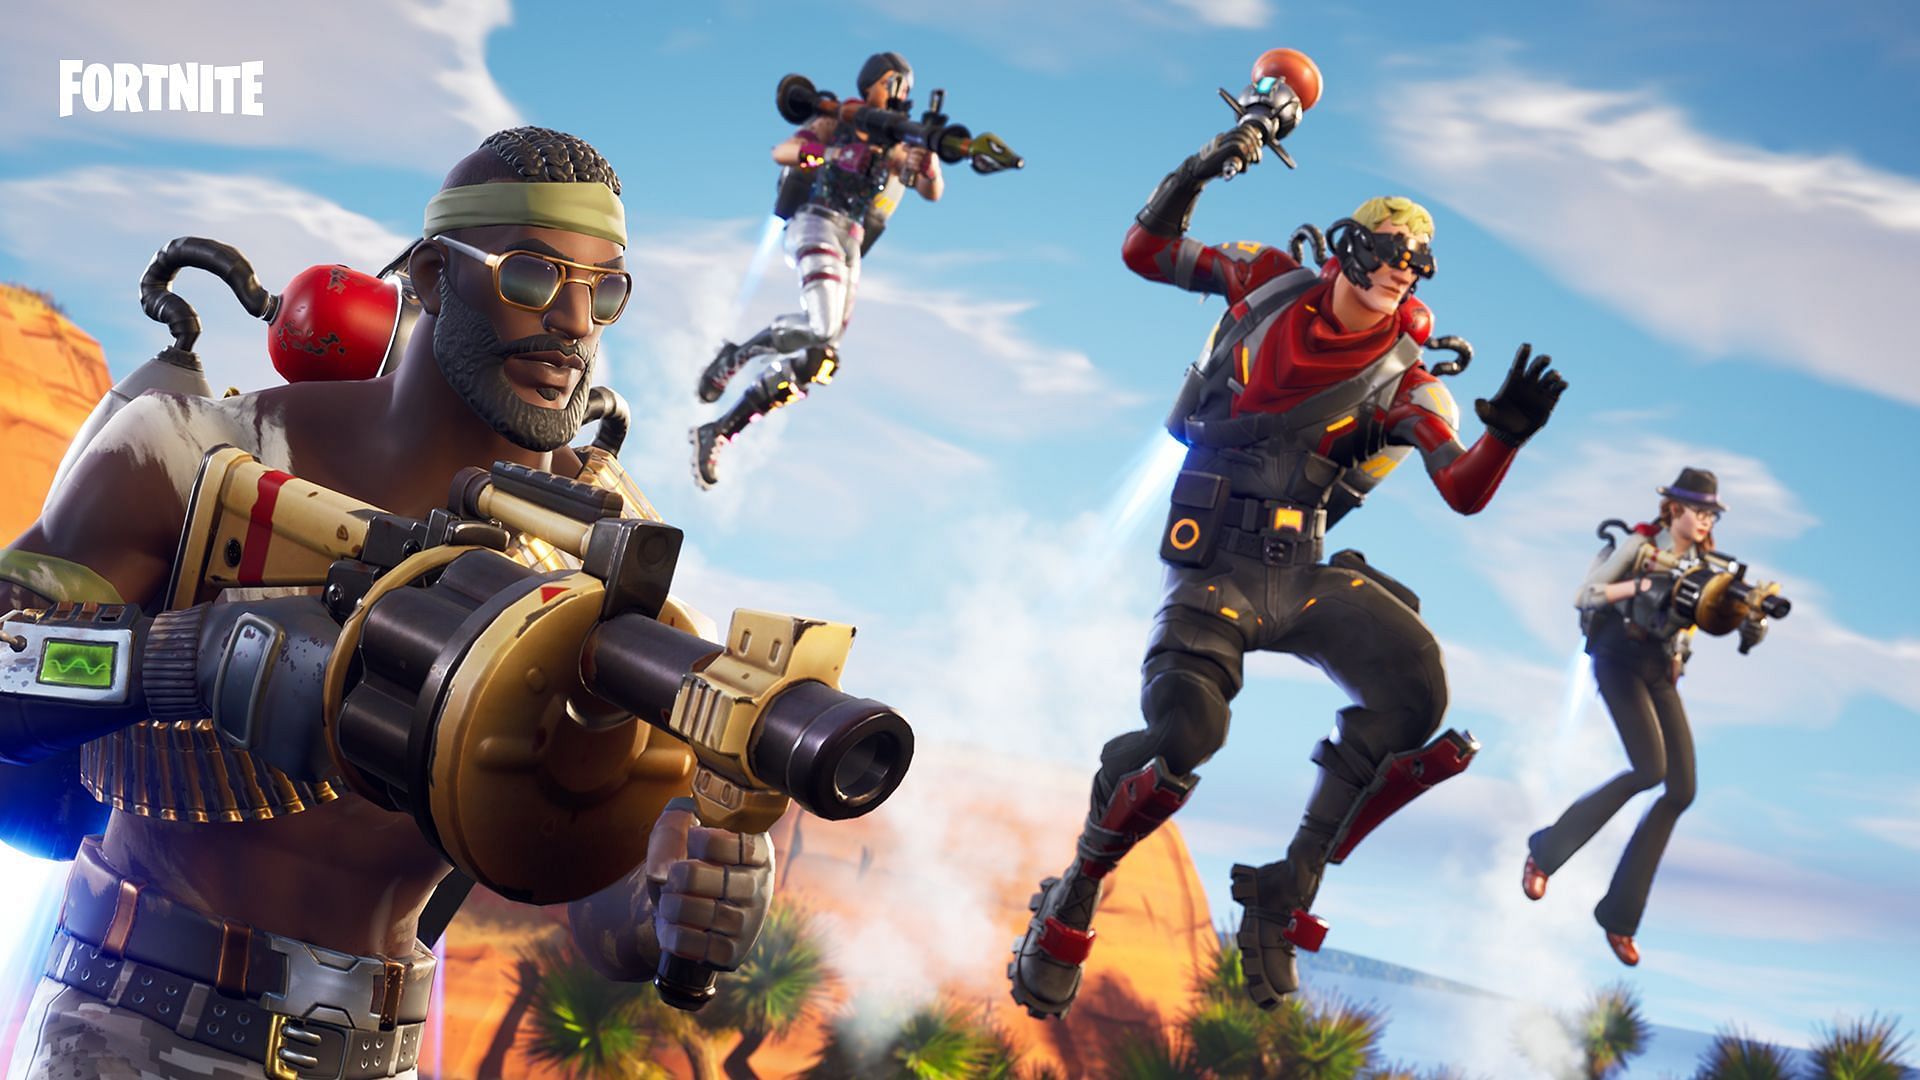 Explosives return to Fortnite challenges with a bang (Image via Epic Games)